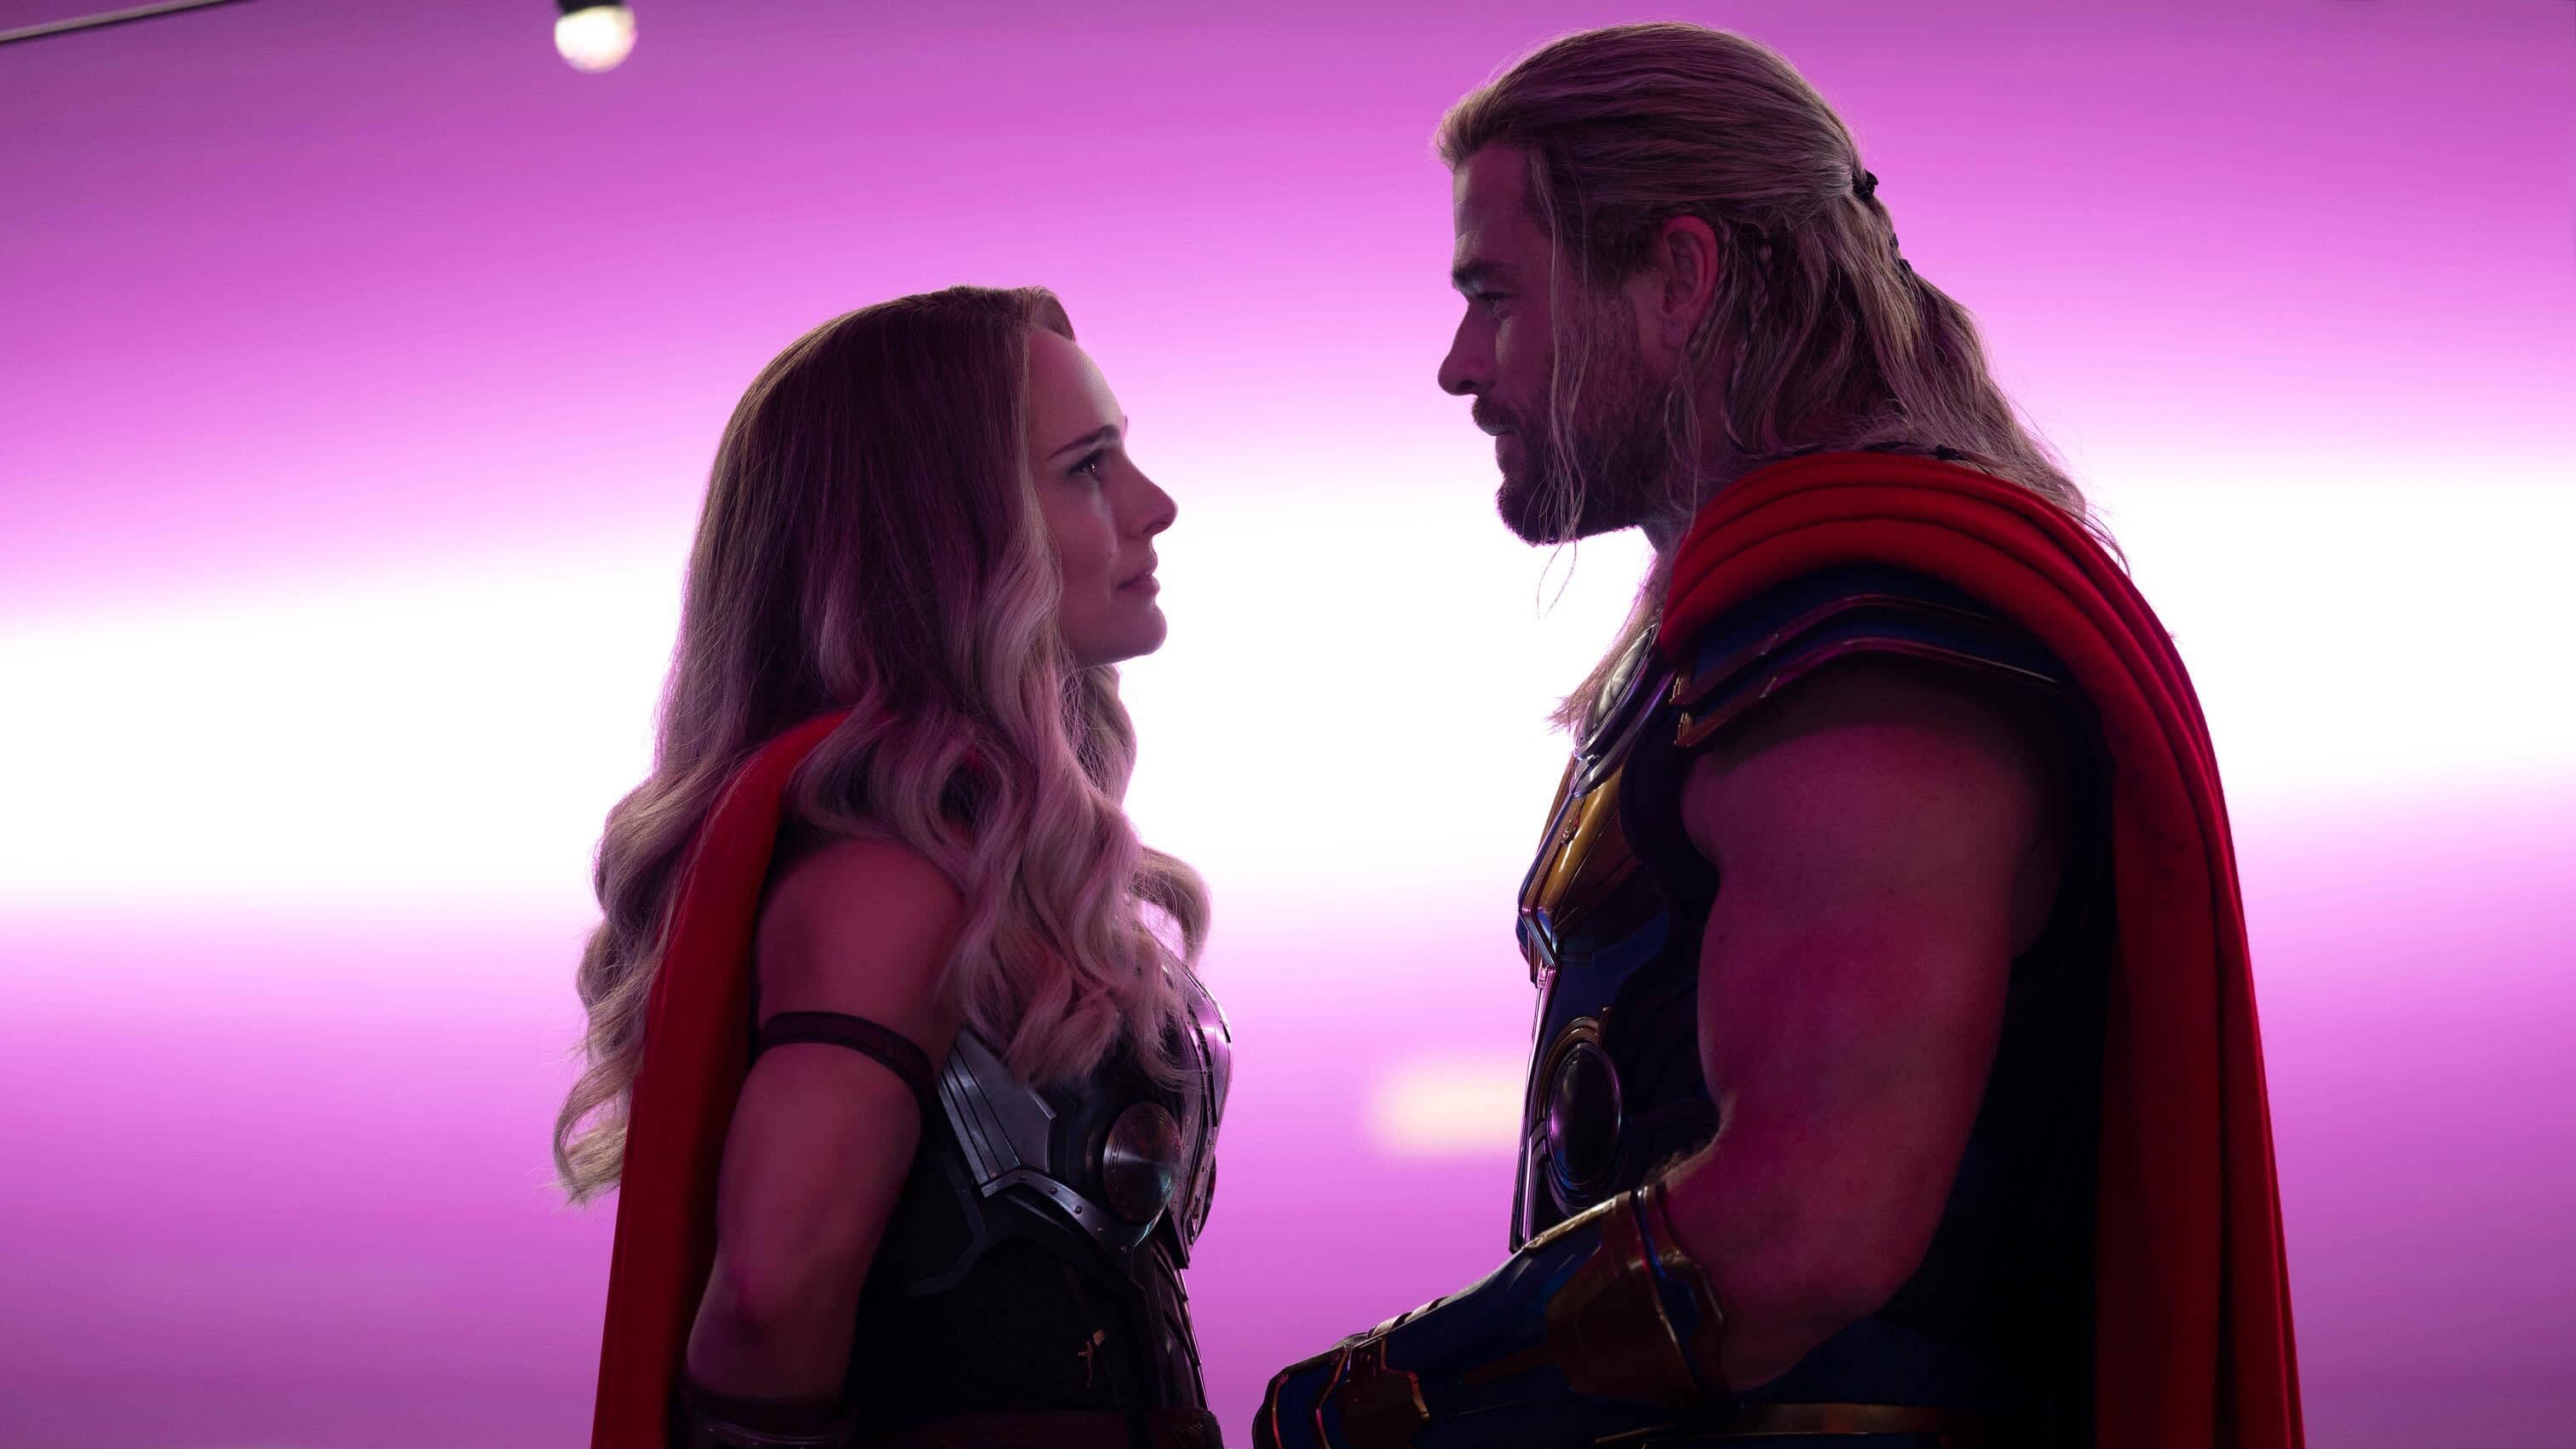 Thor: Love and Thunder' Electrifies the Box Office with $143